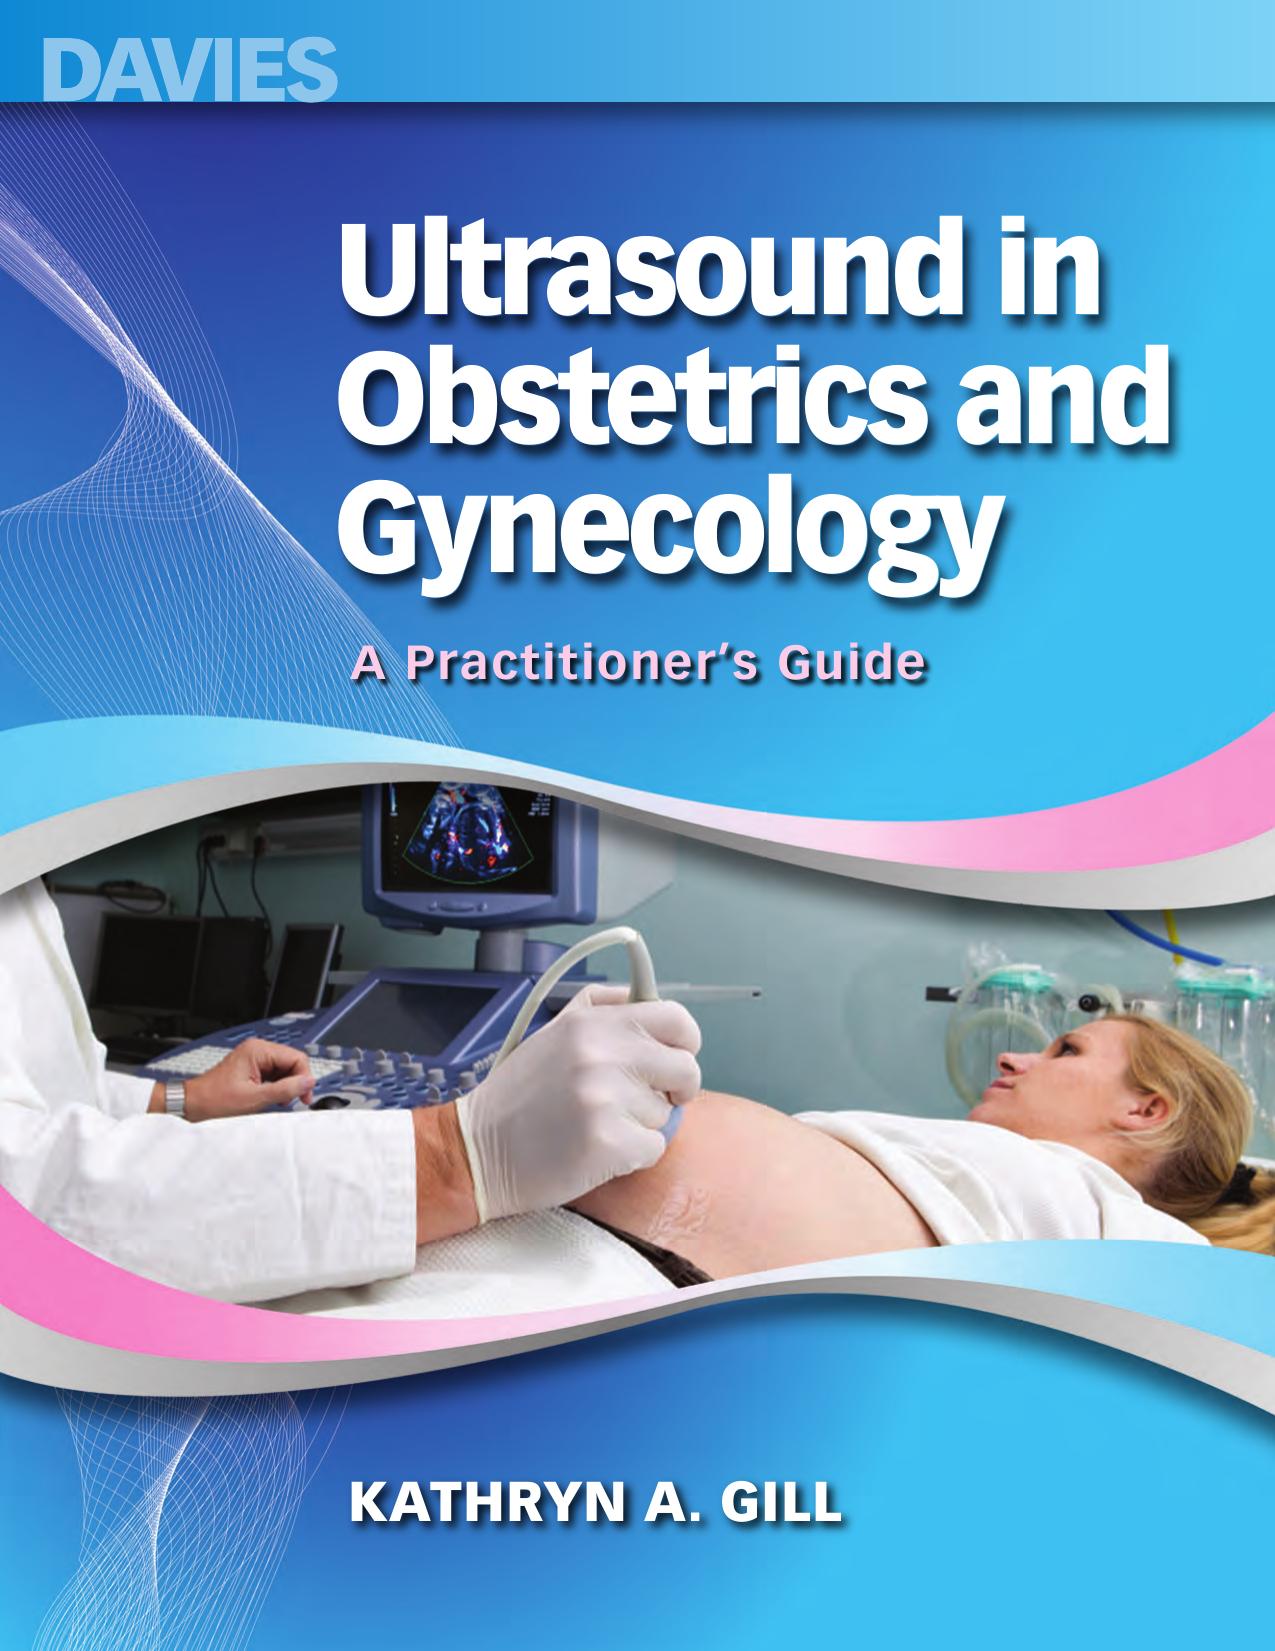 Ultrasound in obstetrics and gynecology  a practitioner’s guide 2014